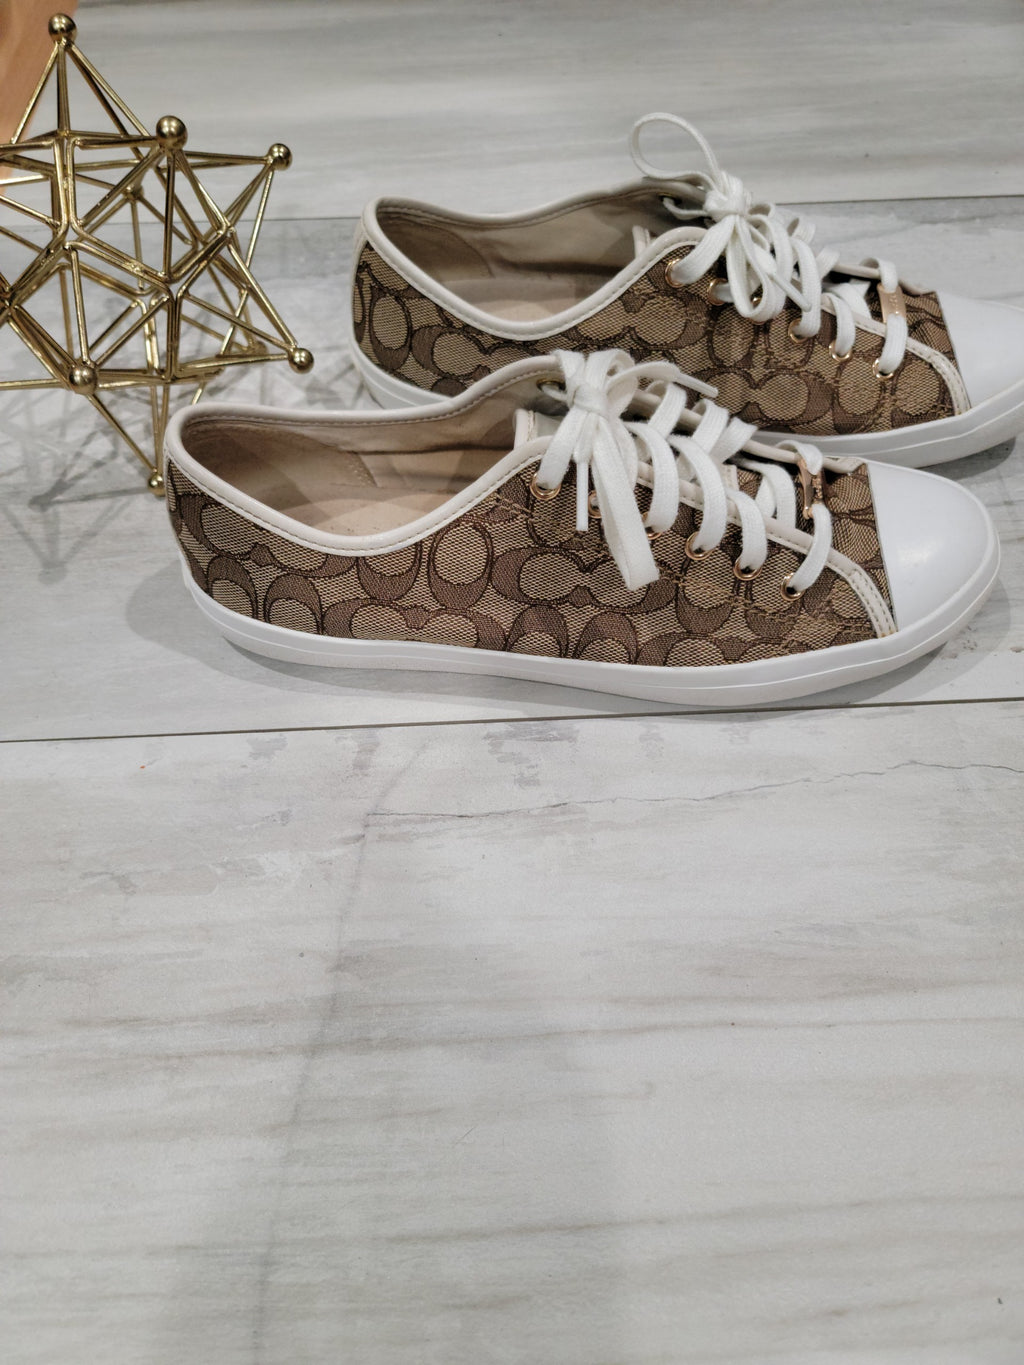 Coach sneakers